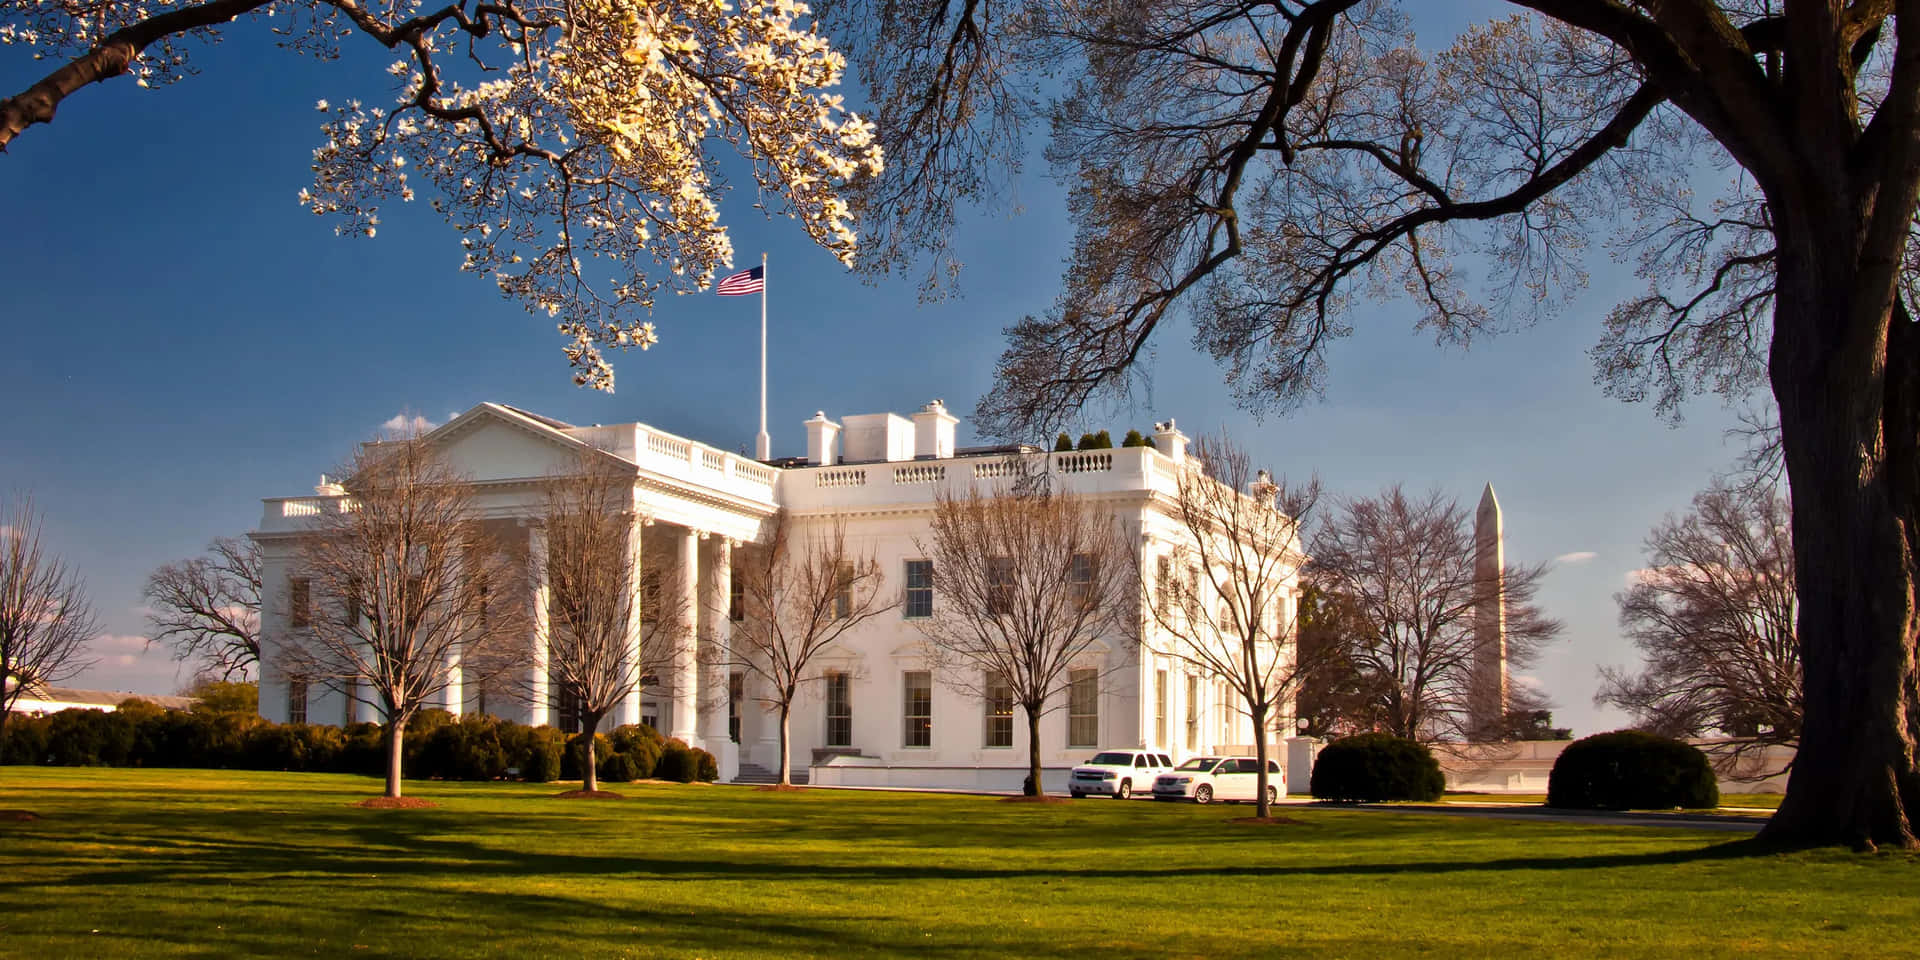 The White House Is In The Middle Of A Grassy Field